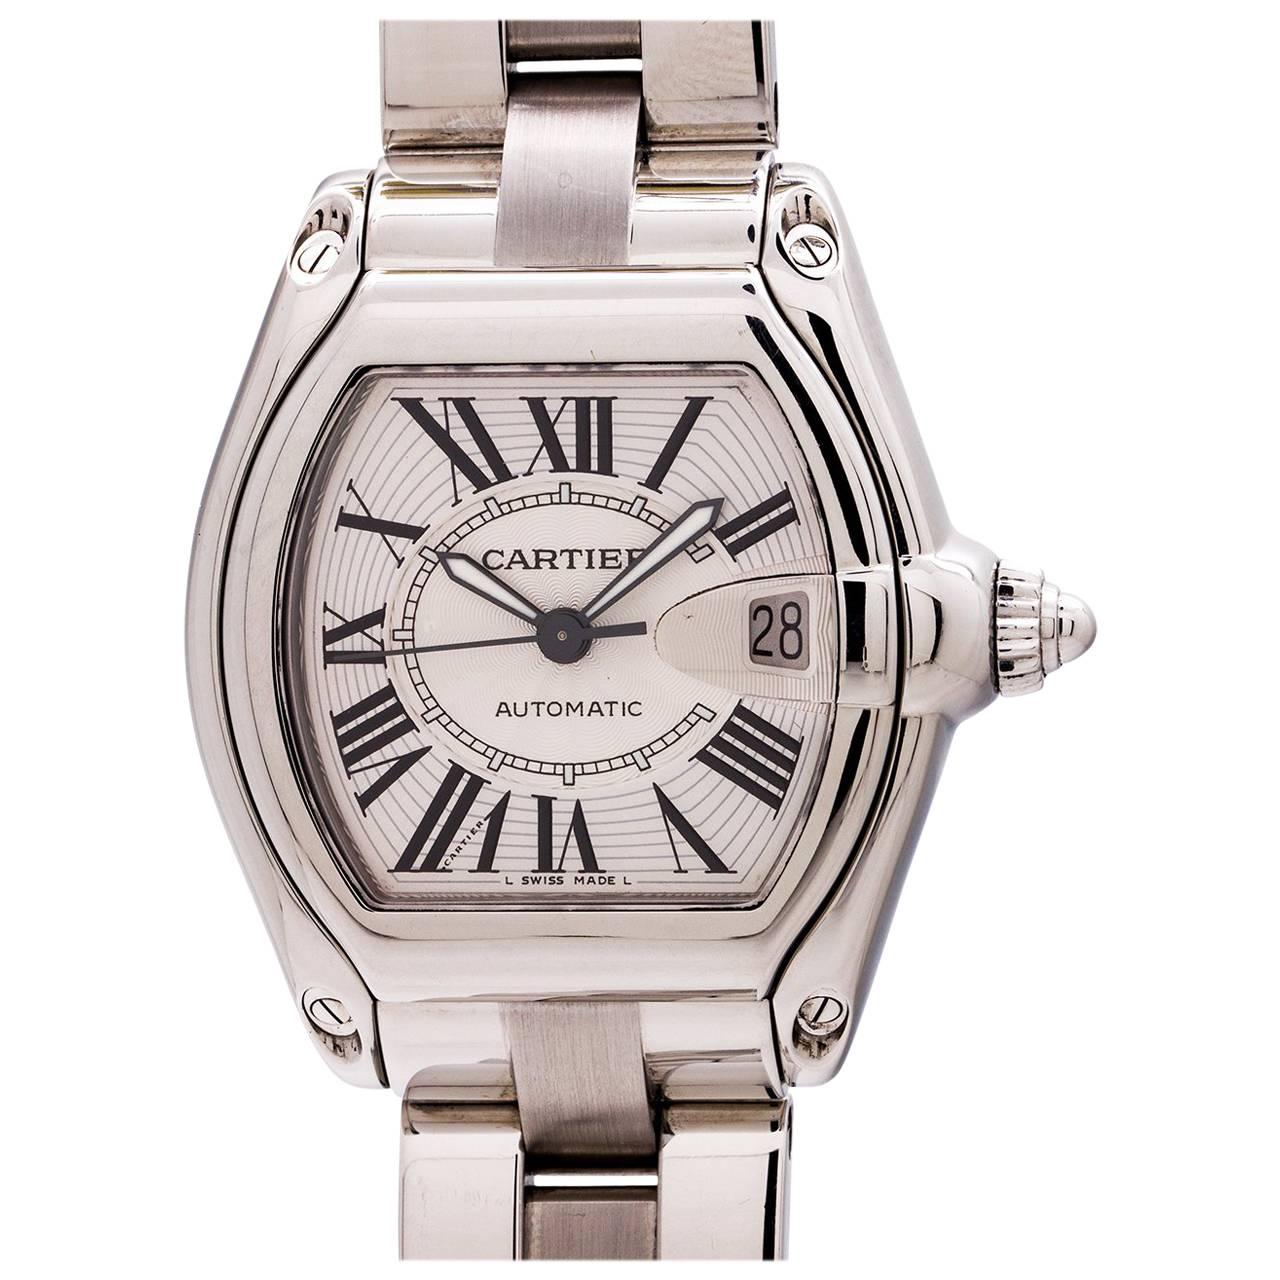 Cartier Stainless Steel Roadster automatic wristwatch, circa 2000s